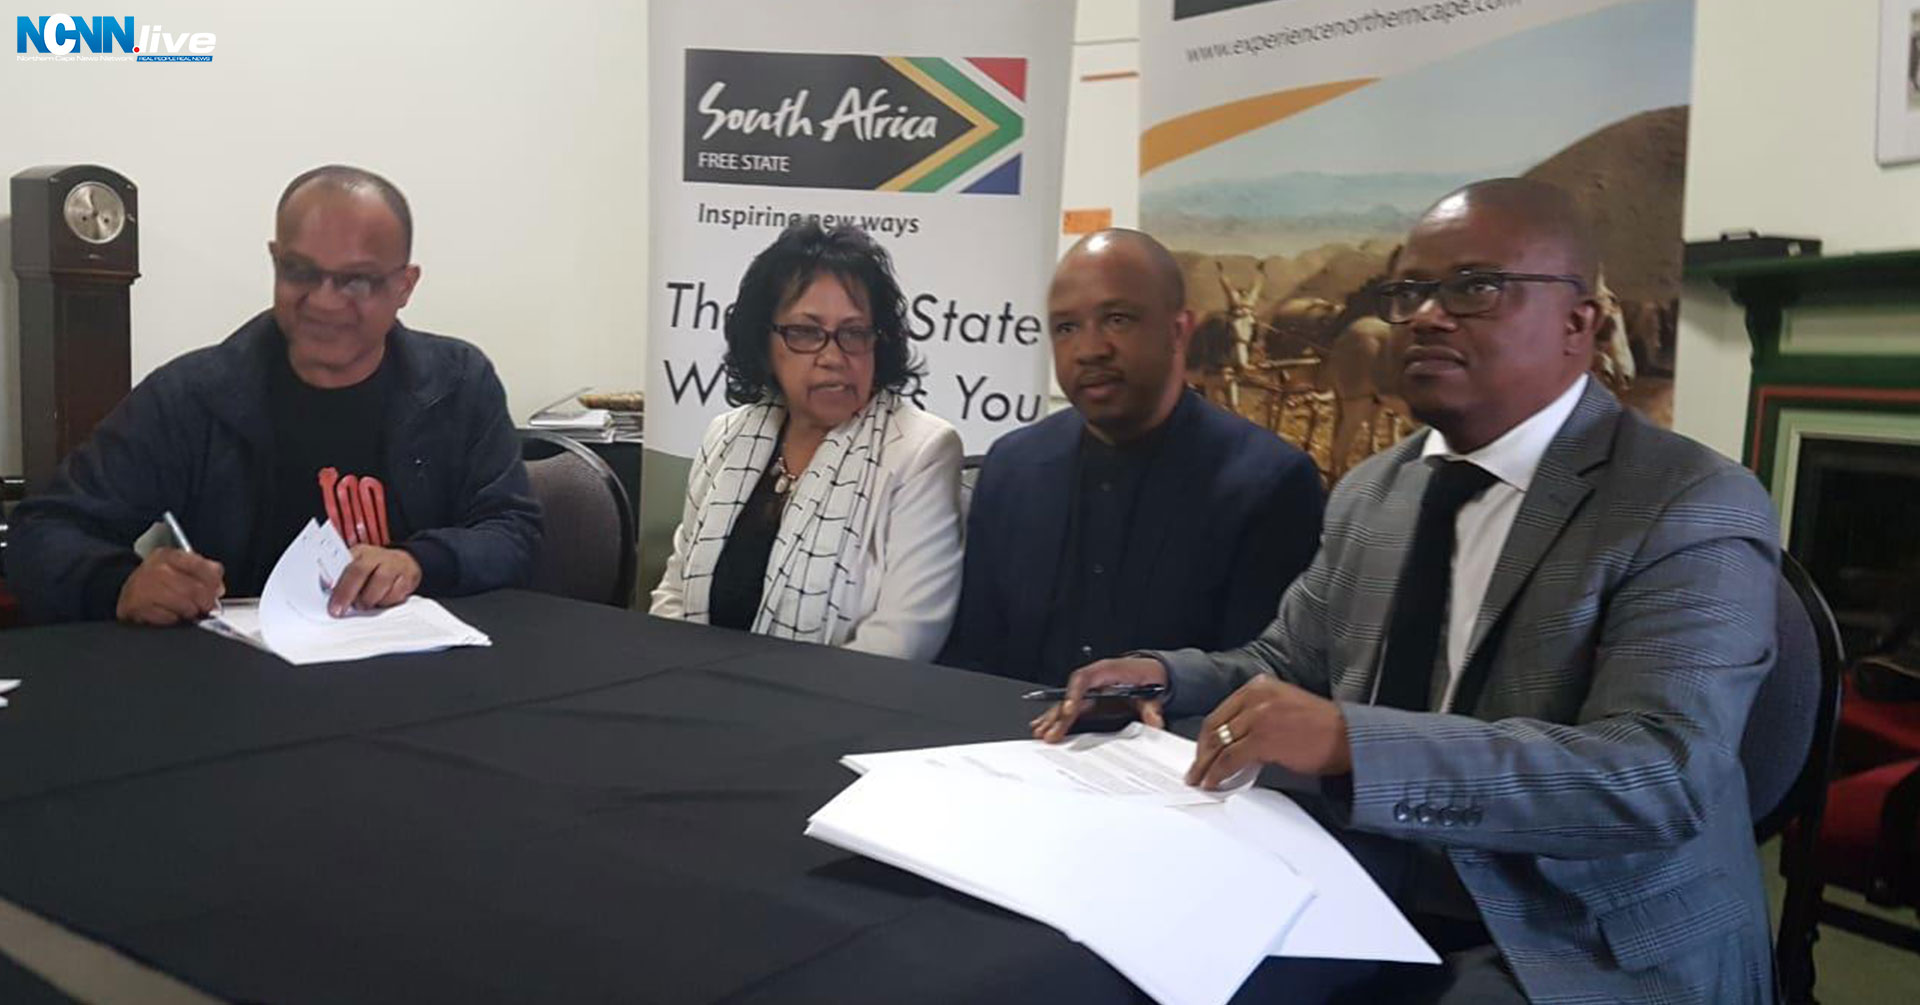 NORTHERN_CAPE_AND_FREE_STATE_UNVEIL_TOURISM_COLLABORATION-FI